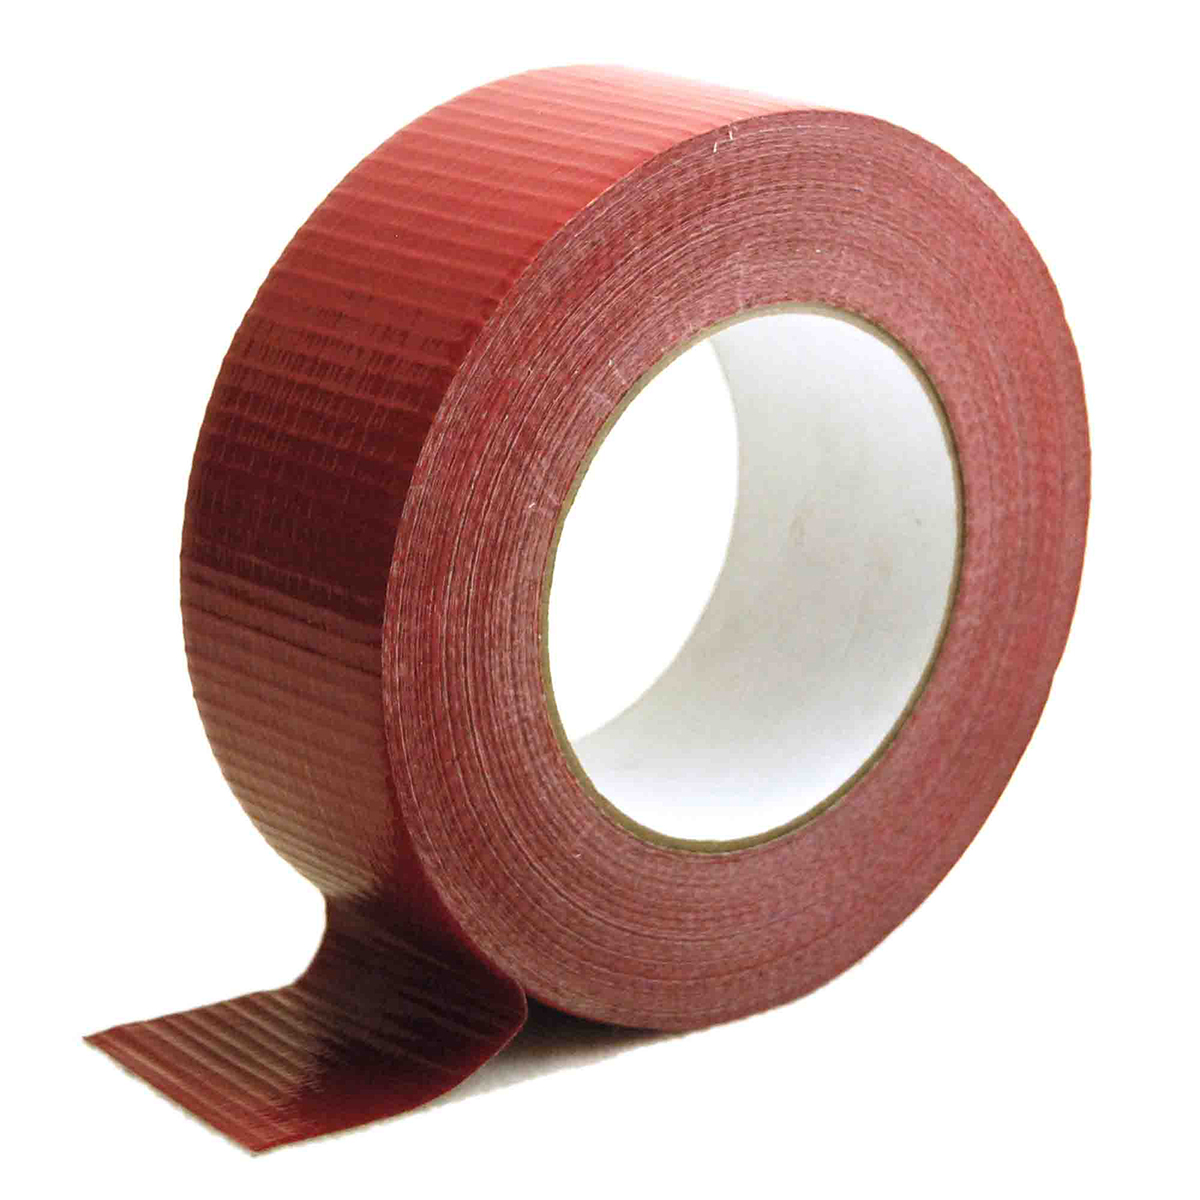 Panzertape 48,5 mm x 50 m Duct Tape rot - verpacking